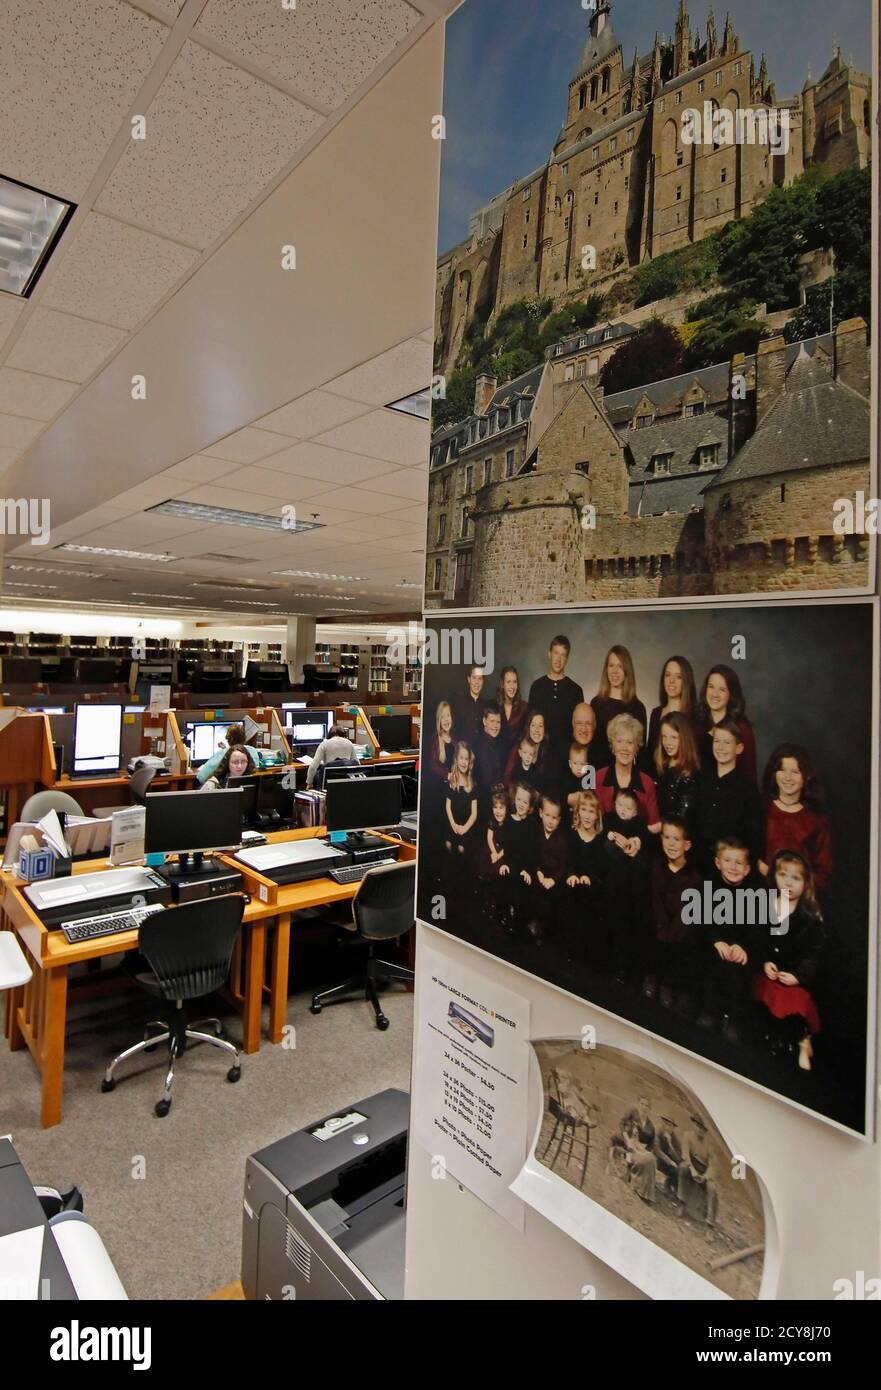 Pictures of families and historical places hang on a wall as people research records to work on their genealogy in the Family History Library of The Church of Jesus Christ of Latter-Day Saints on the campus of Brigham Young University (BYU) in Provo February 16, 2012. REUTERS/George Frey  (UNITED STATES - Tags: EDUCATION RELIGION) Stock Photo